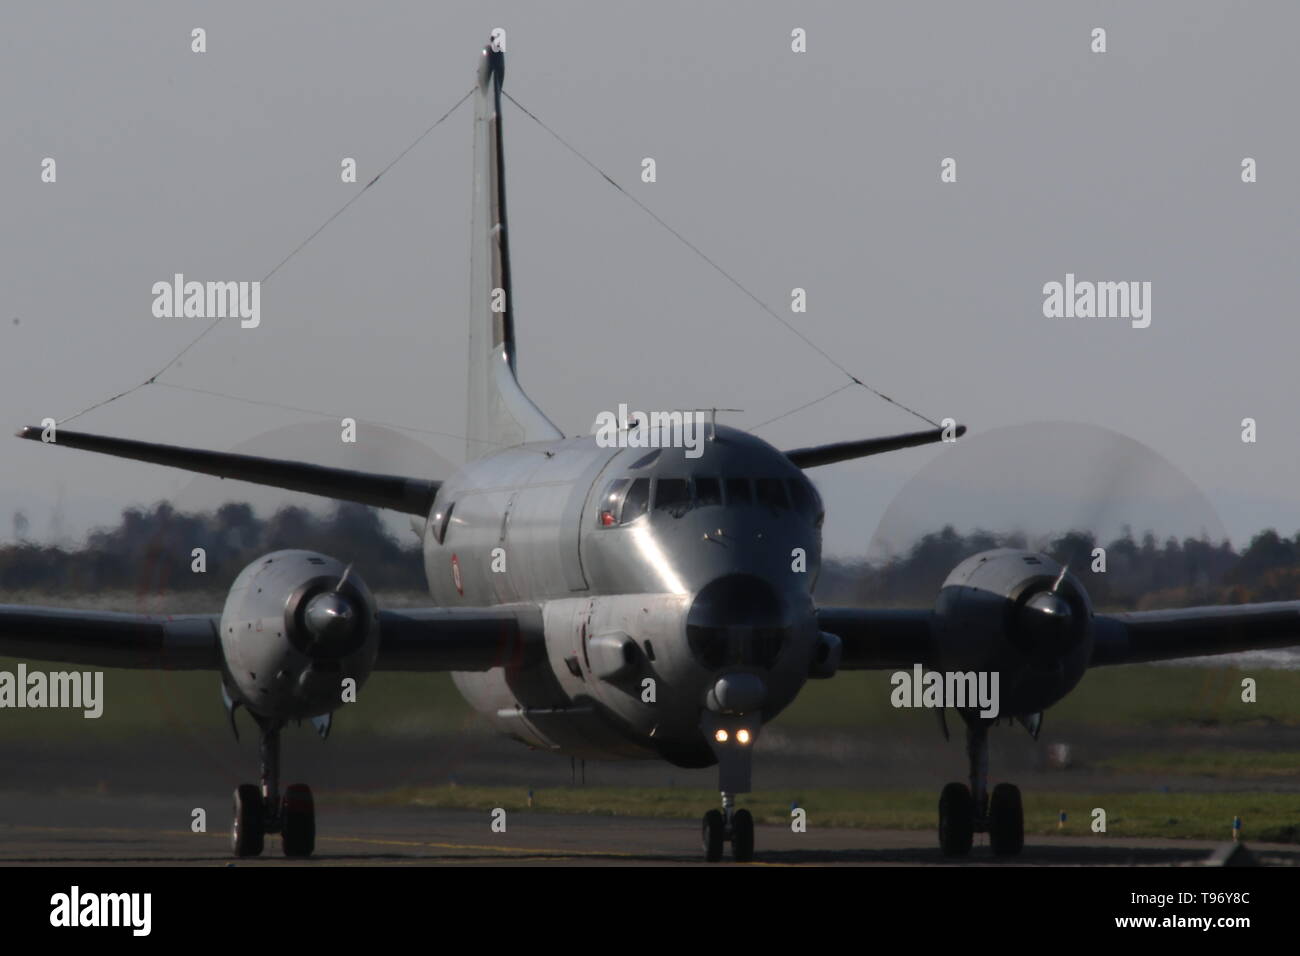 9, a Breguet Atlantique 2 maritime patrol aircraft operated by the French Navy, at Prestwick Airport during Exercise Joint Warrior 19-1. Stock Photo